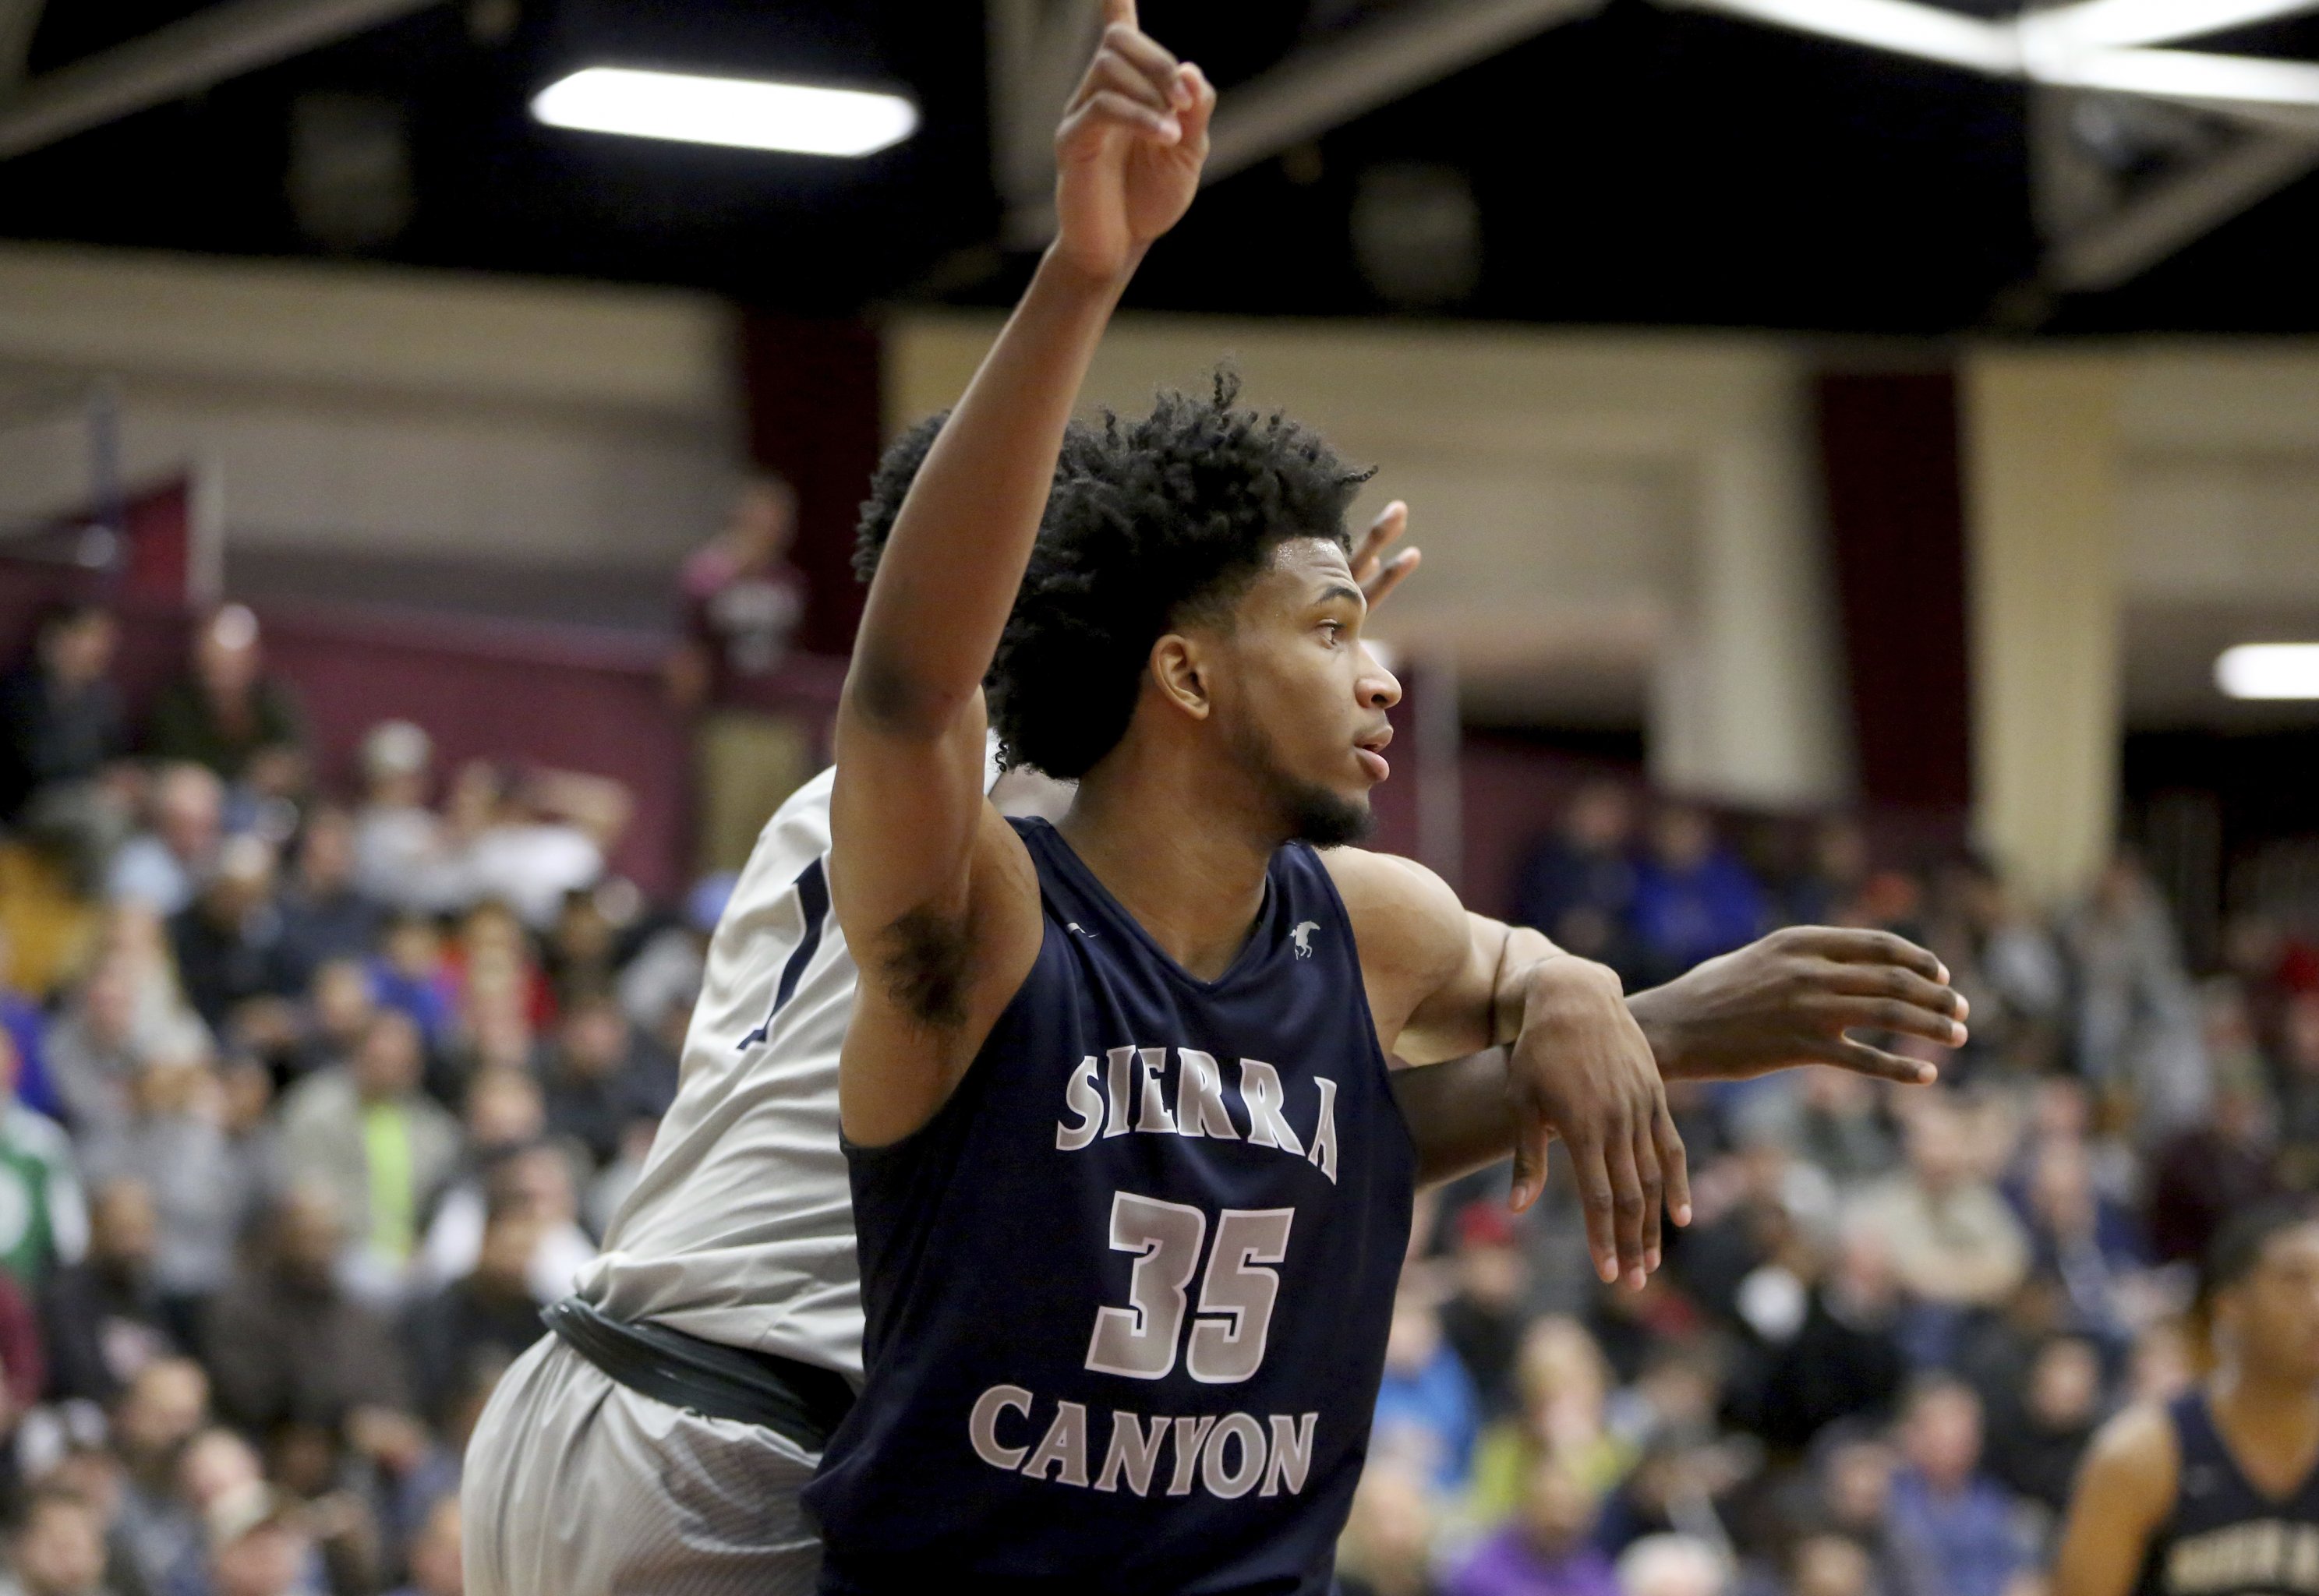 Sierra Canyon's Marvin Bagley III ready to make impact on